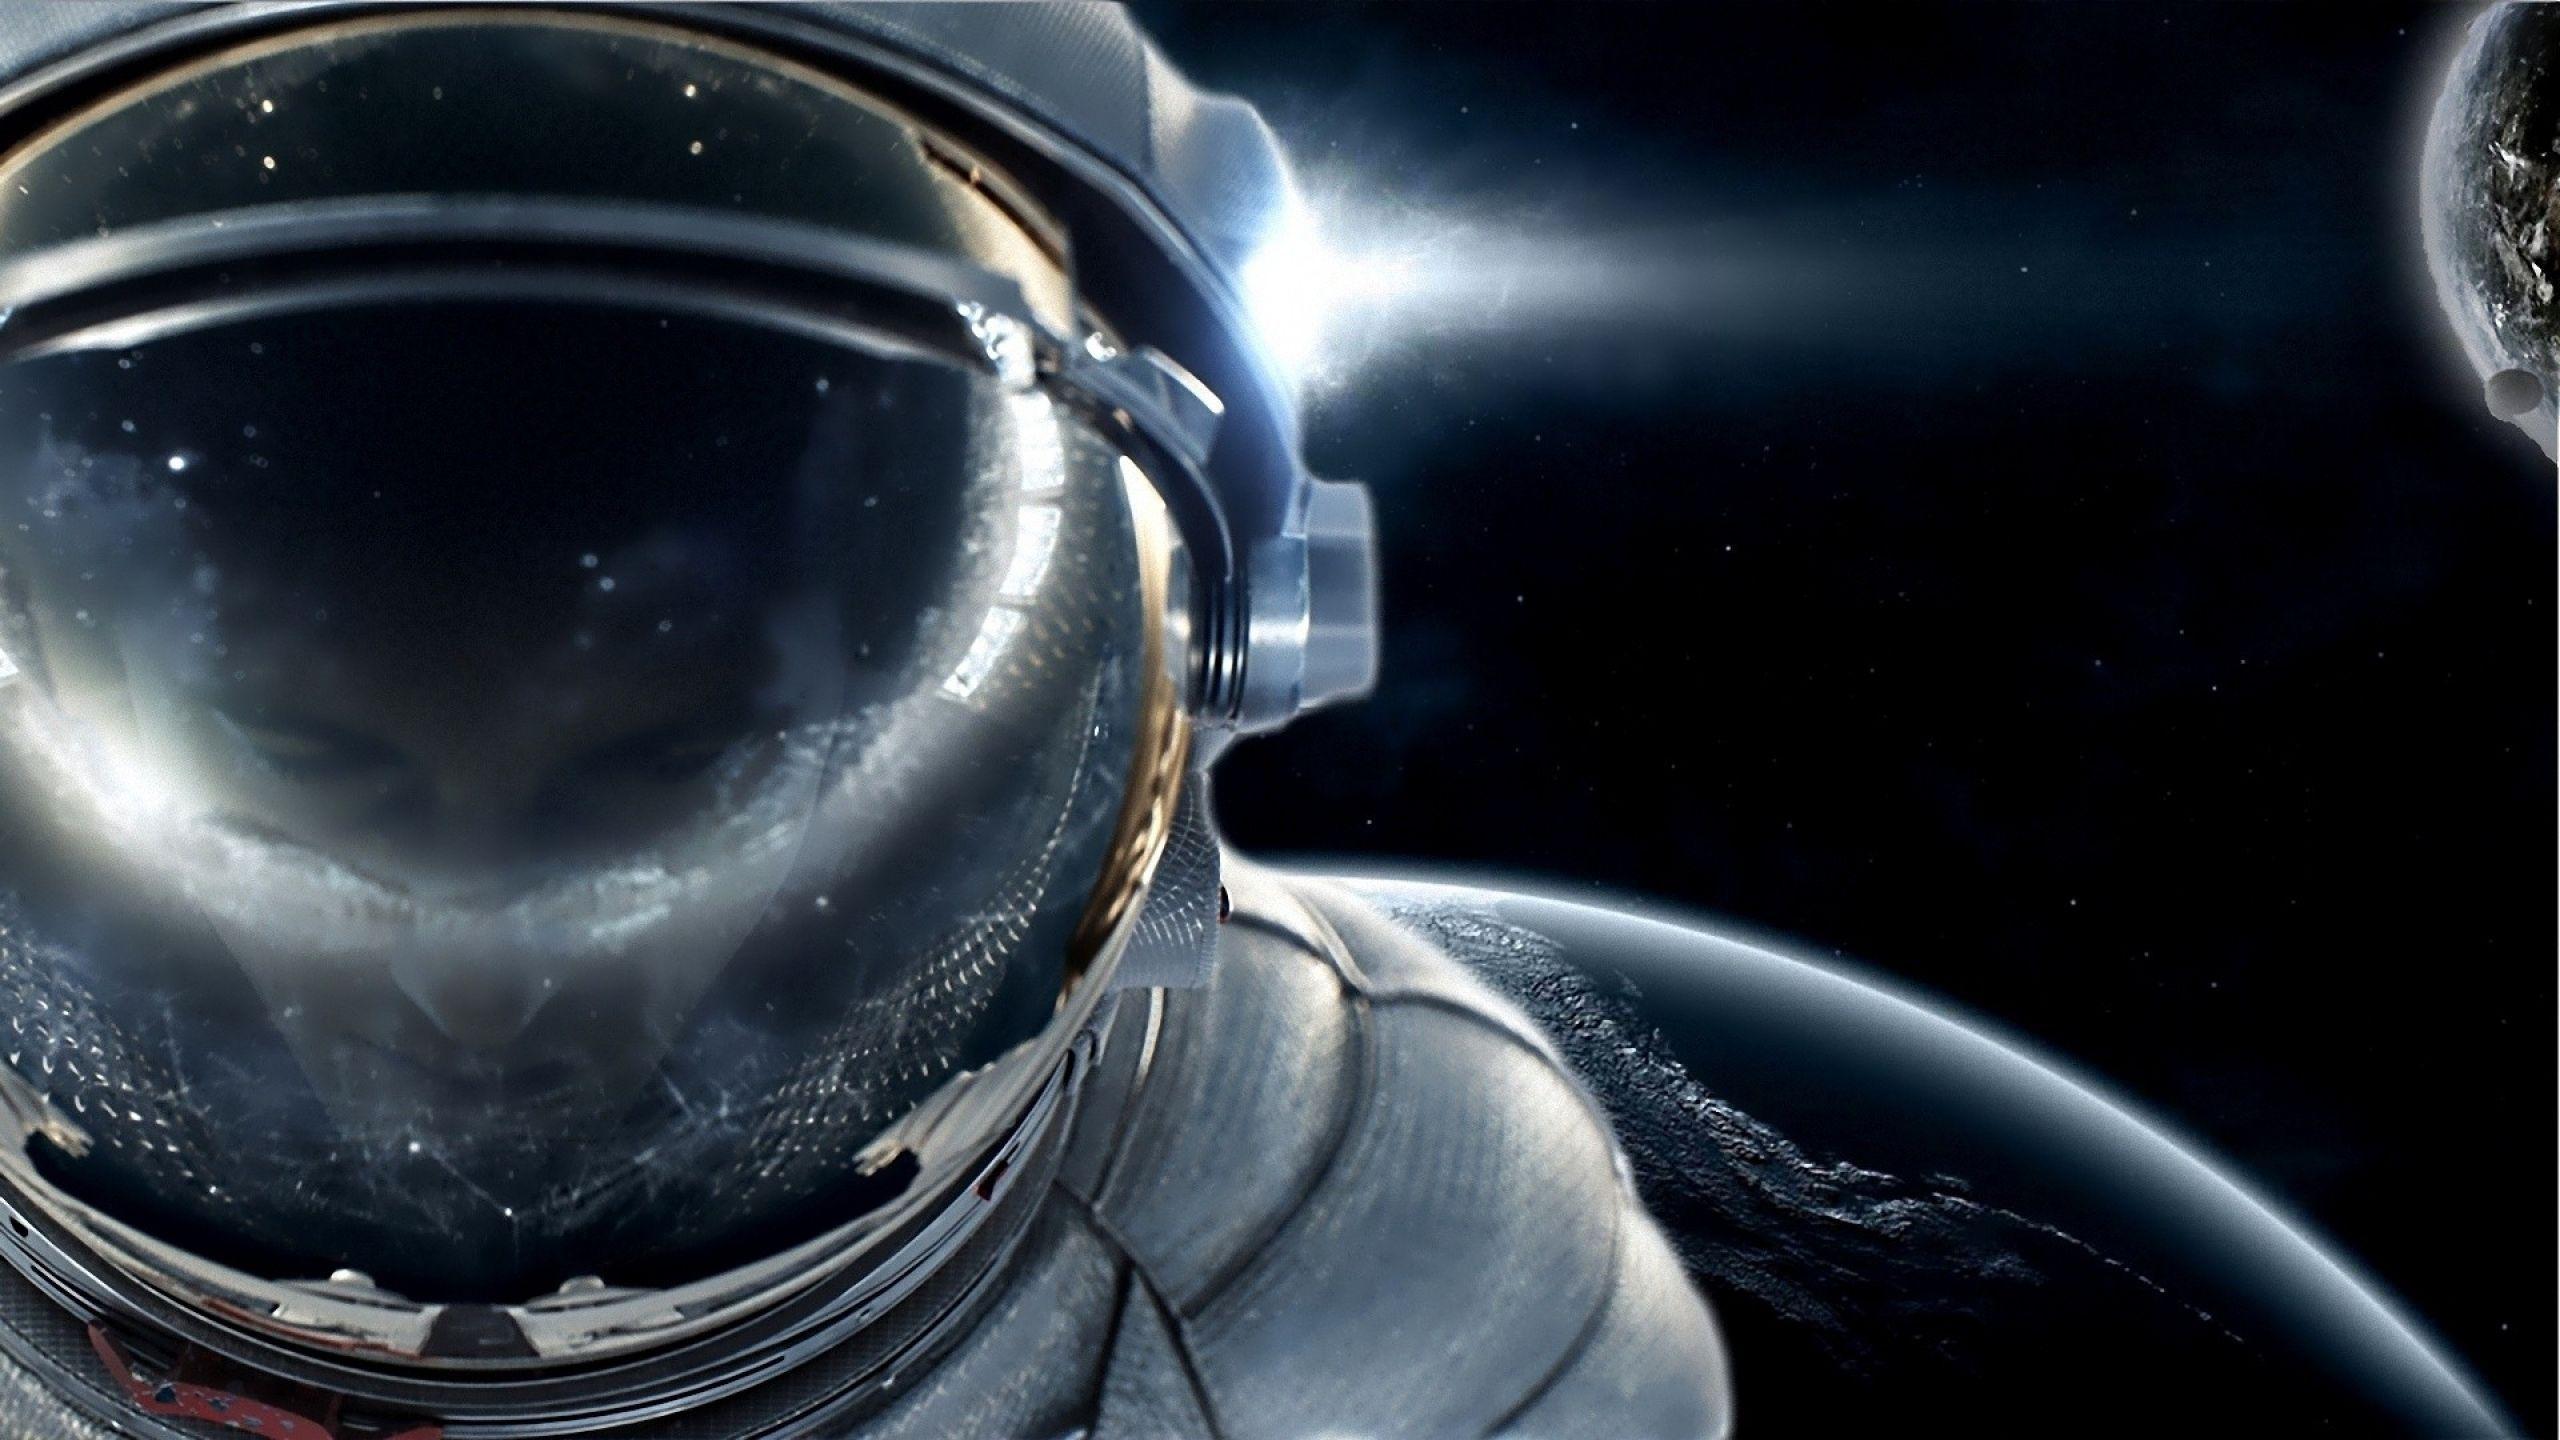 outer space astronomy astronauts spaceman 1920x1080 wallpaper